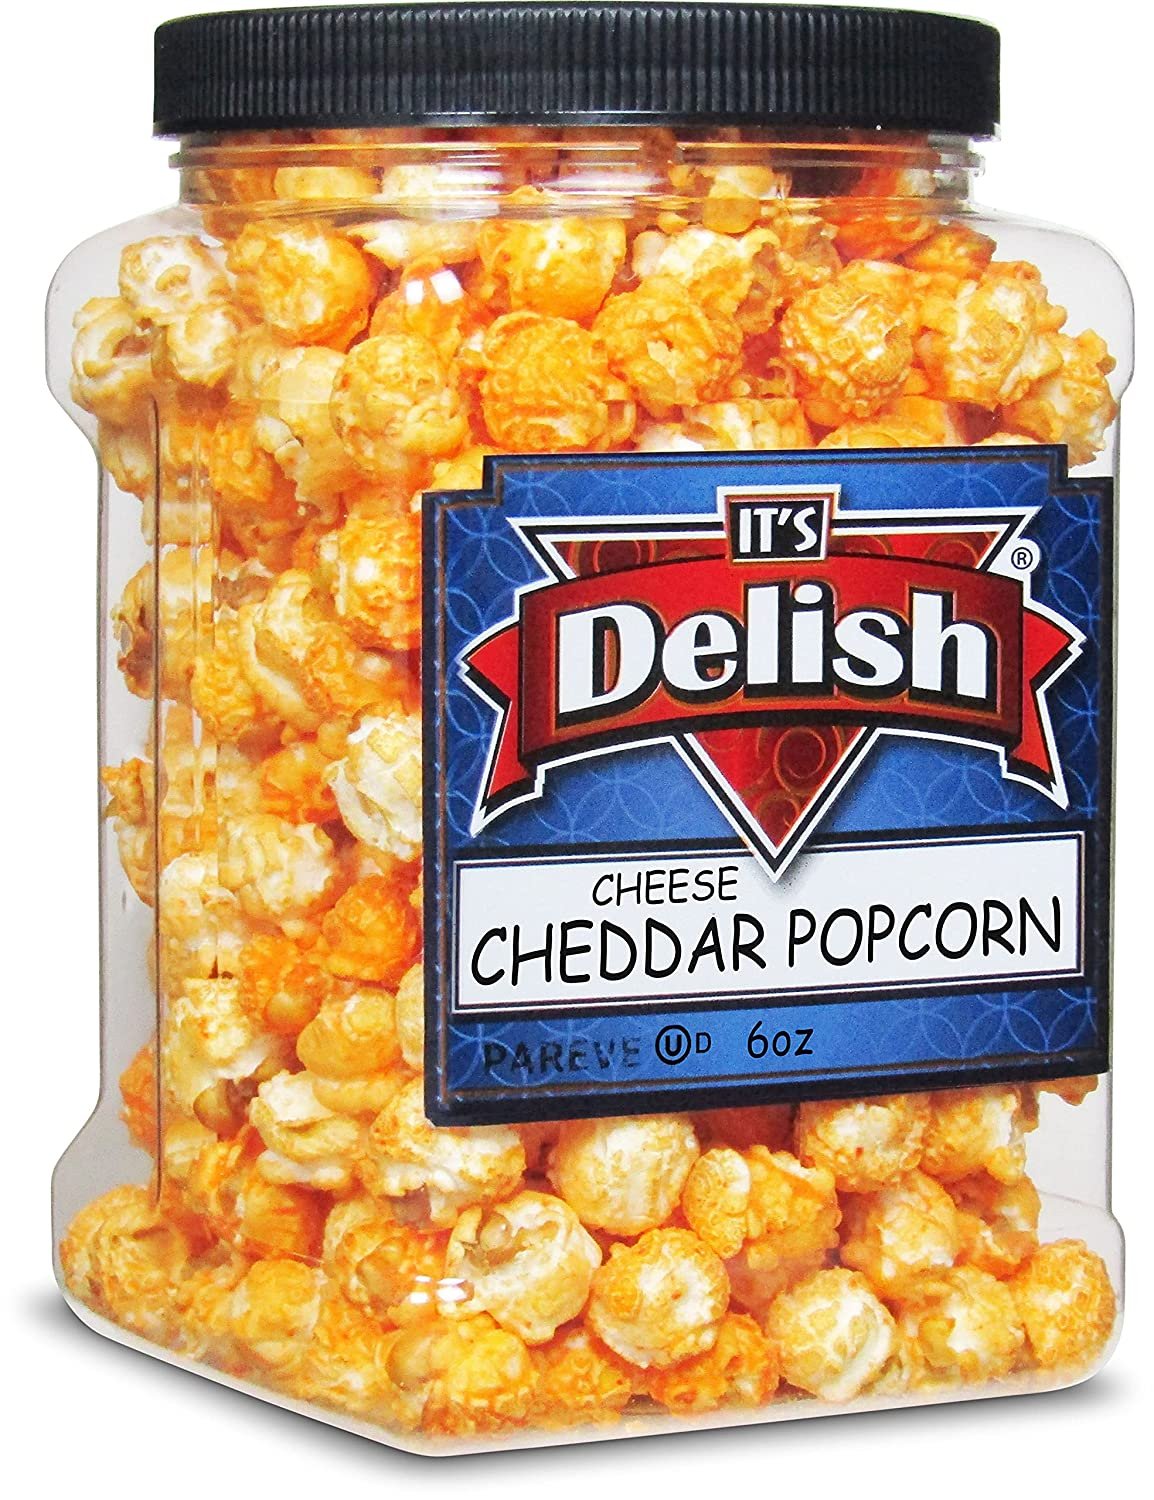 Gourmet Cheddar Cheese Popcorn by It's Delish, 6 oz Jumbo-Sized Reusable Container (Jar) Festive Caramel Corn Air Popped Sweet and Crunchy Glazed Car